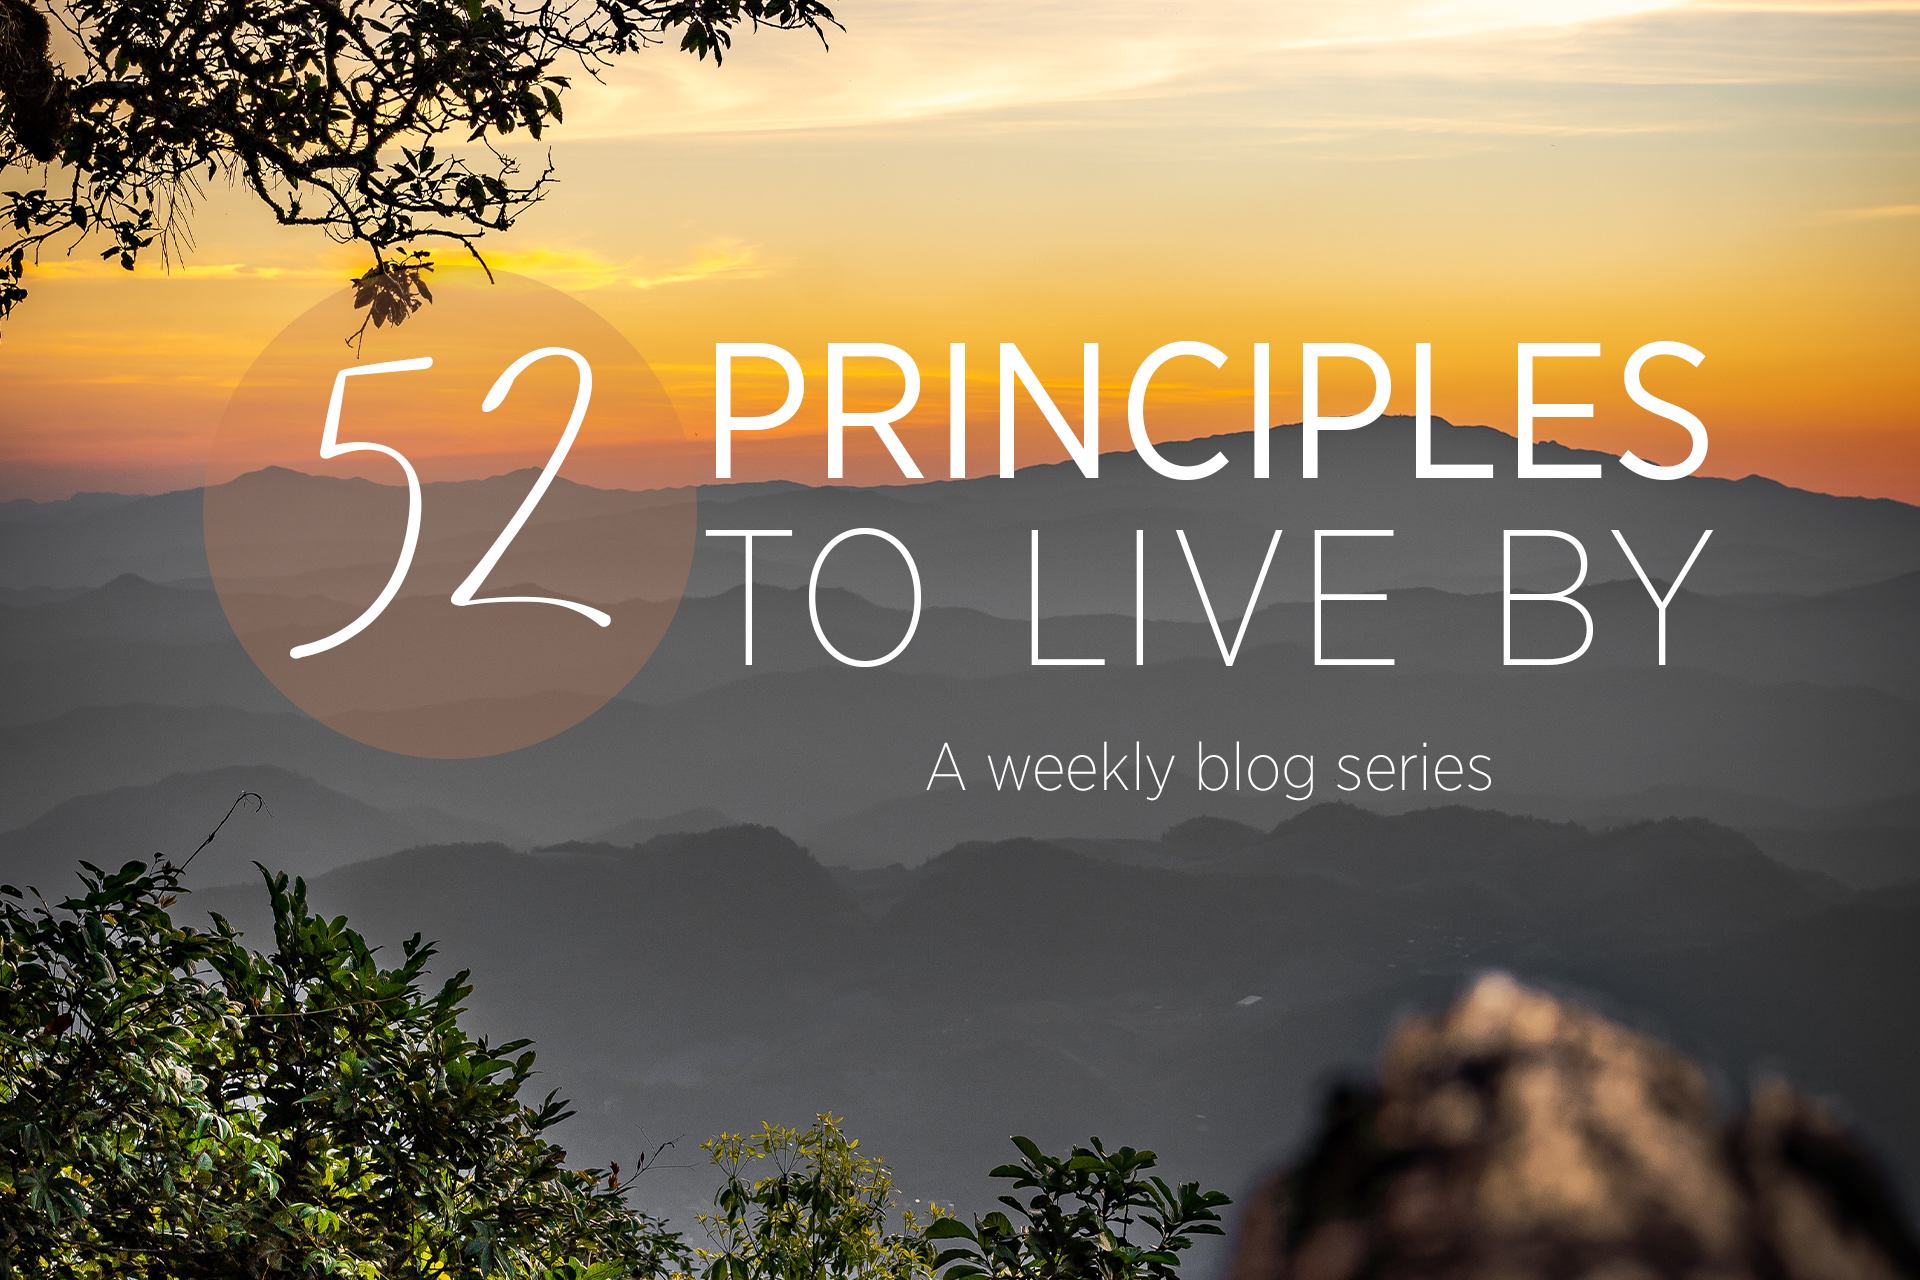  52 Principles to Live By